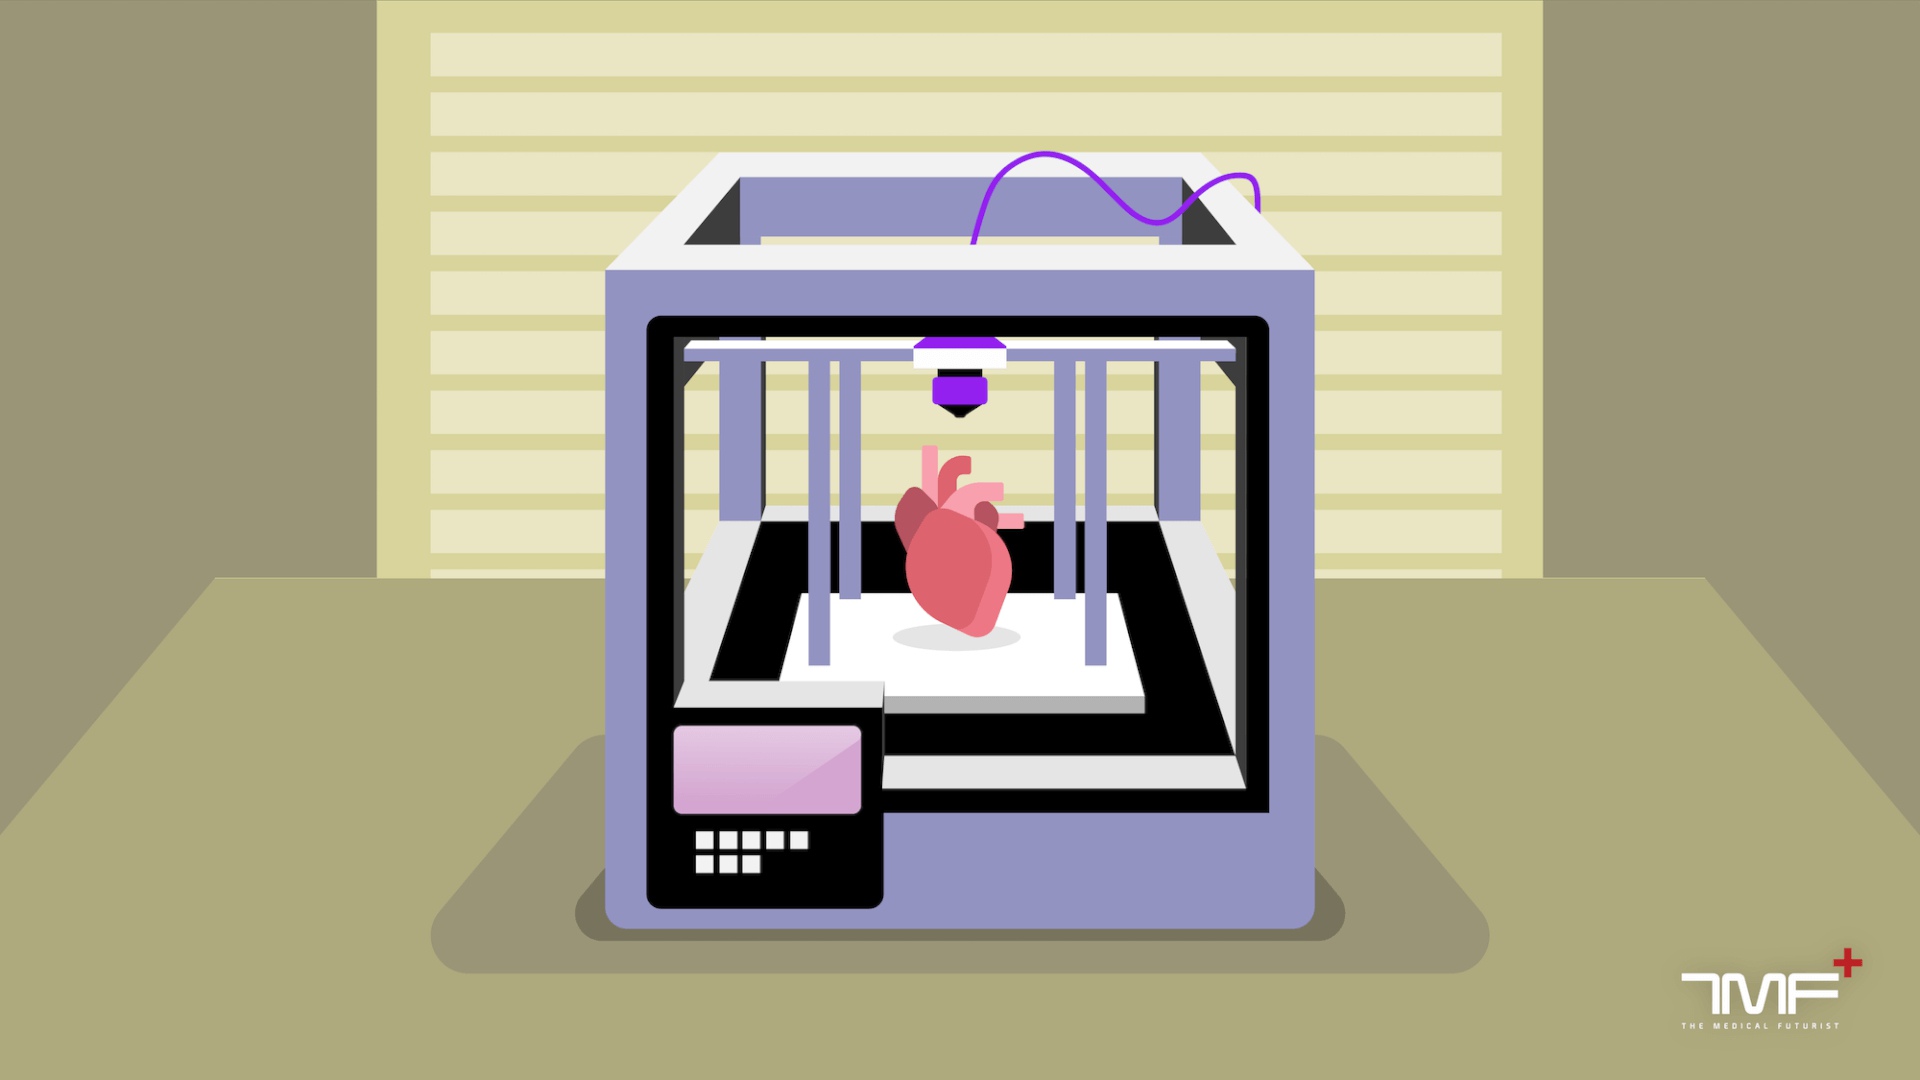 3D Bioprinting - Overview of How Bioprinting Will Break Into Healthcare